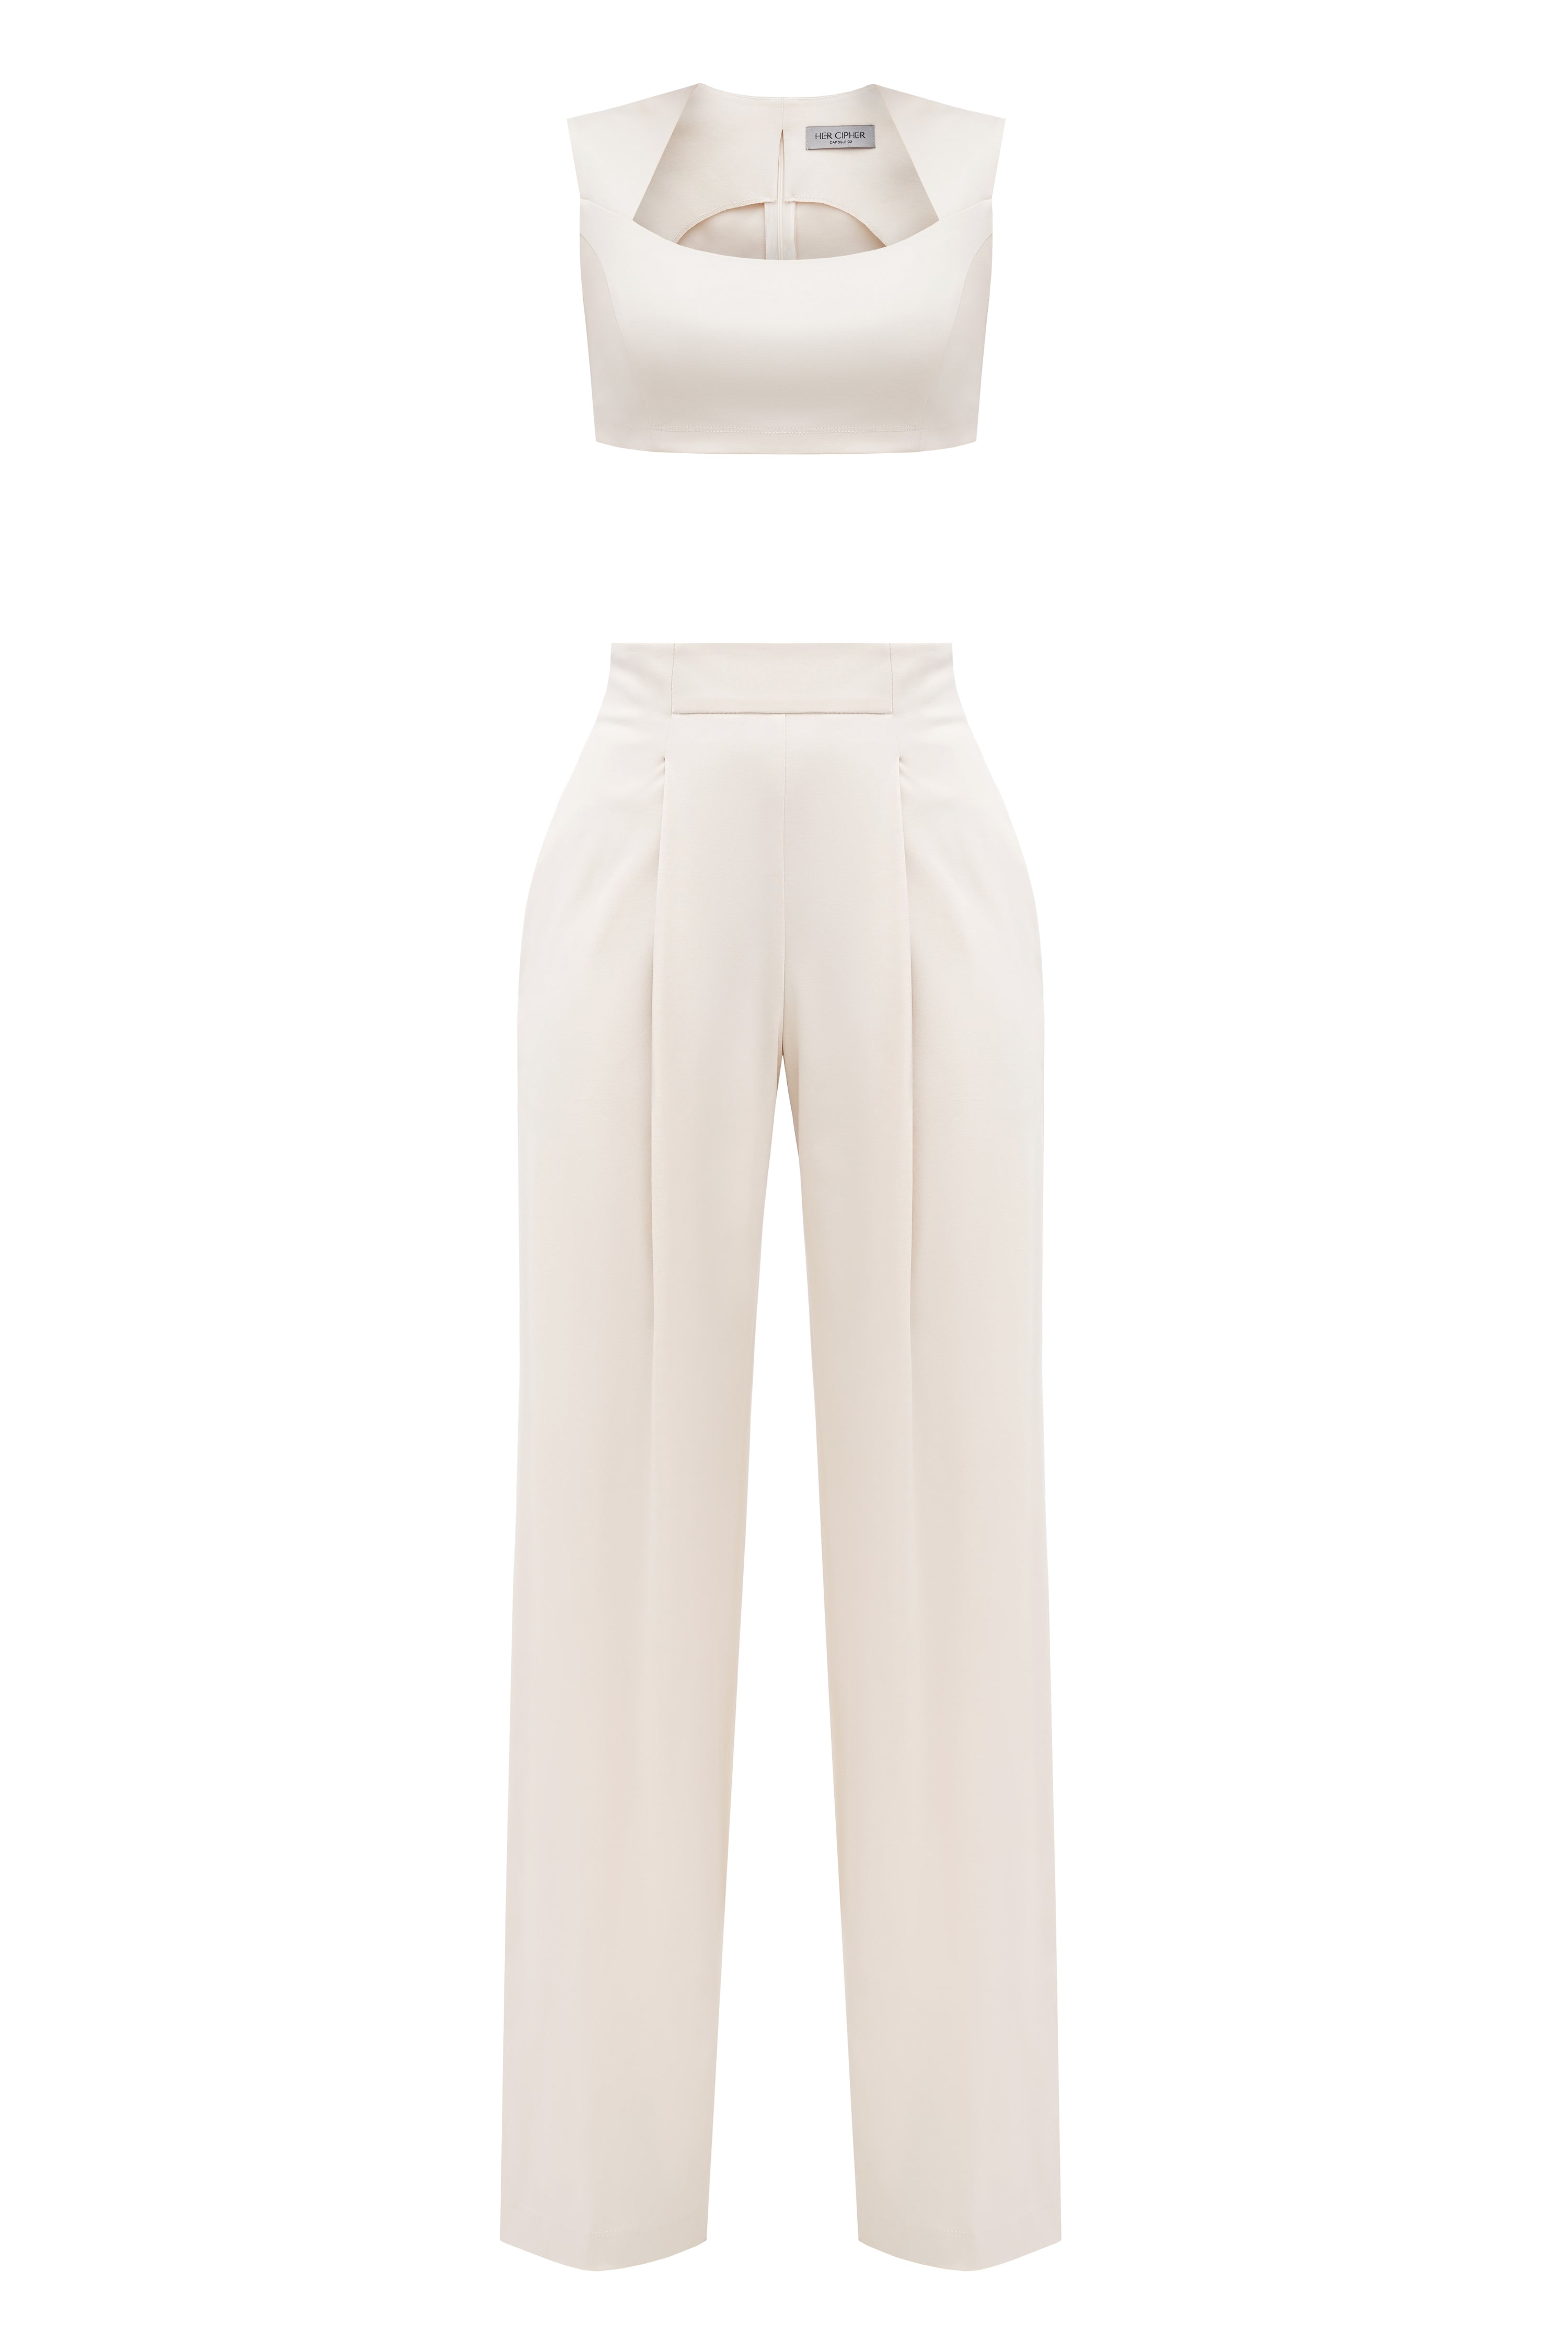 A set of crop top and pants created from a light beige sustainable cotton  